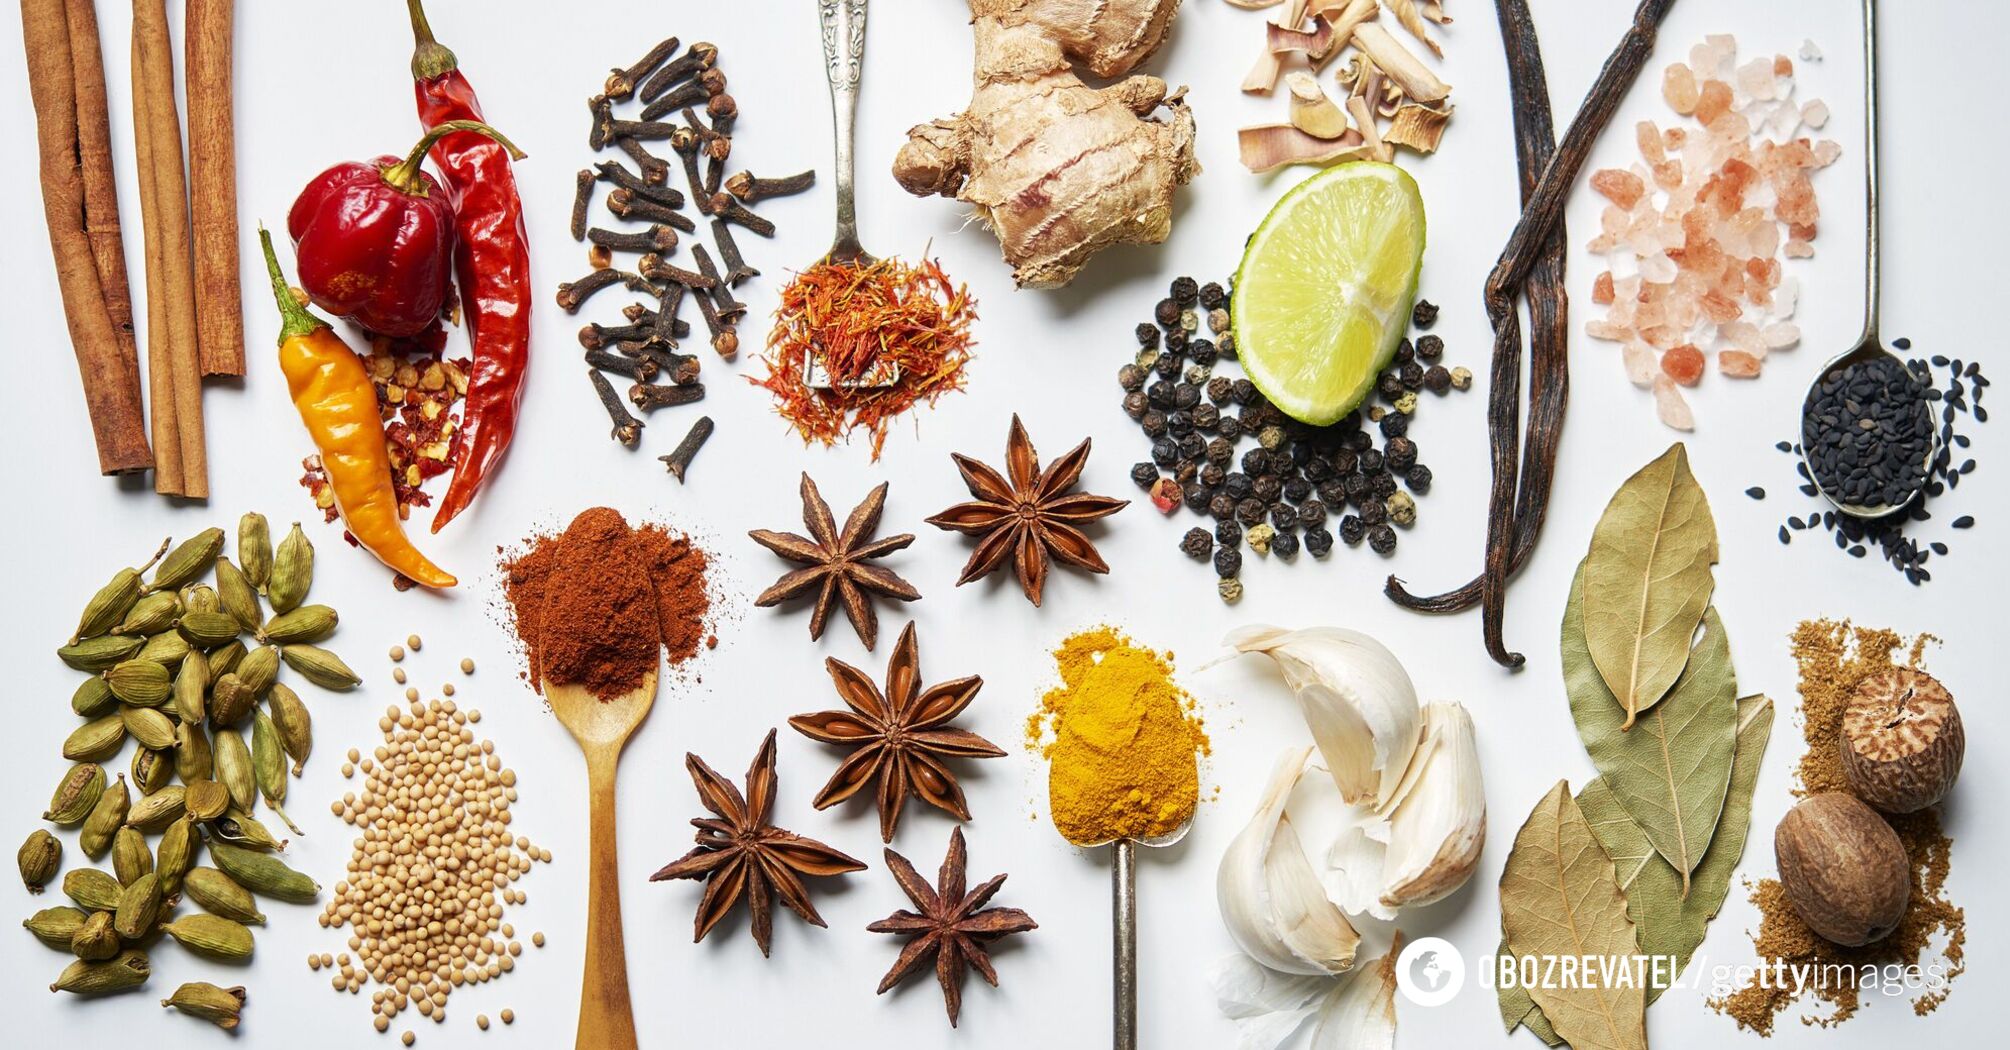 Spices that will suit all dishes